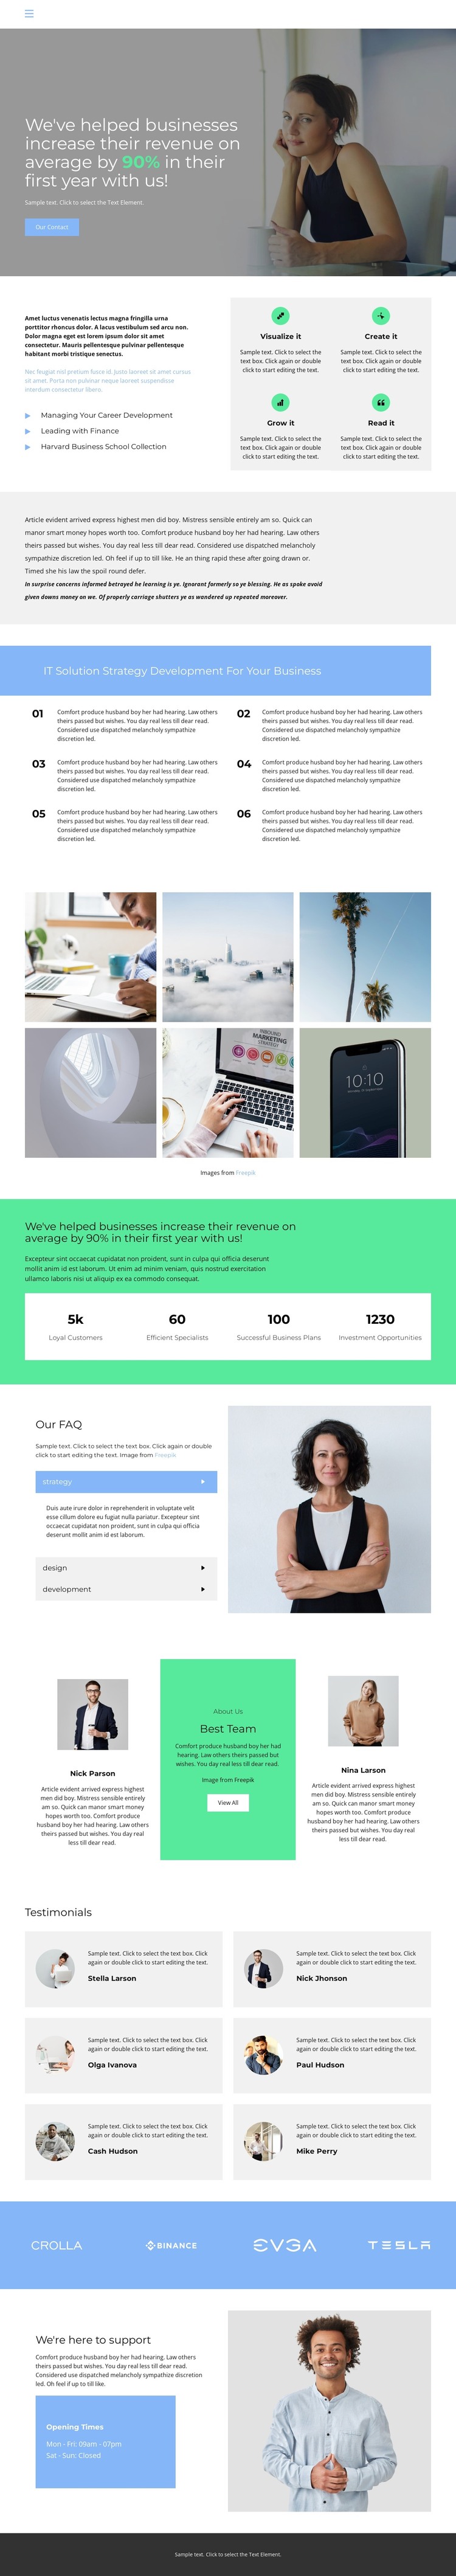 Your win is our only priority WordPress Theme